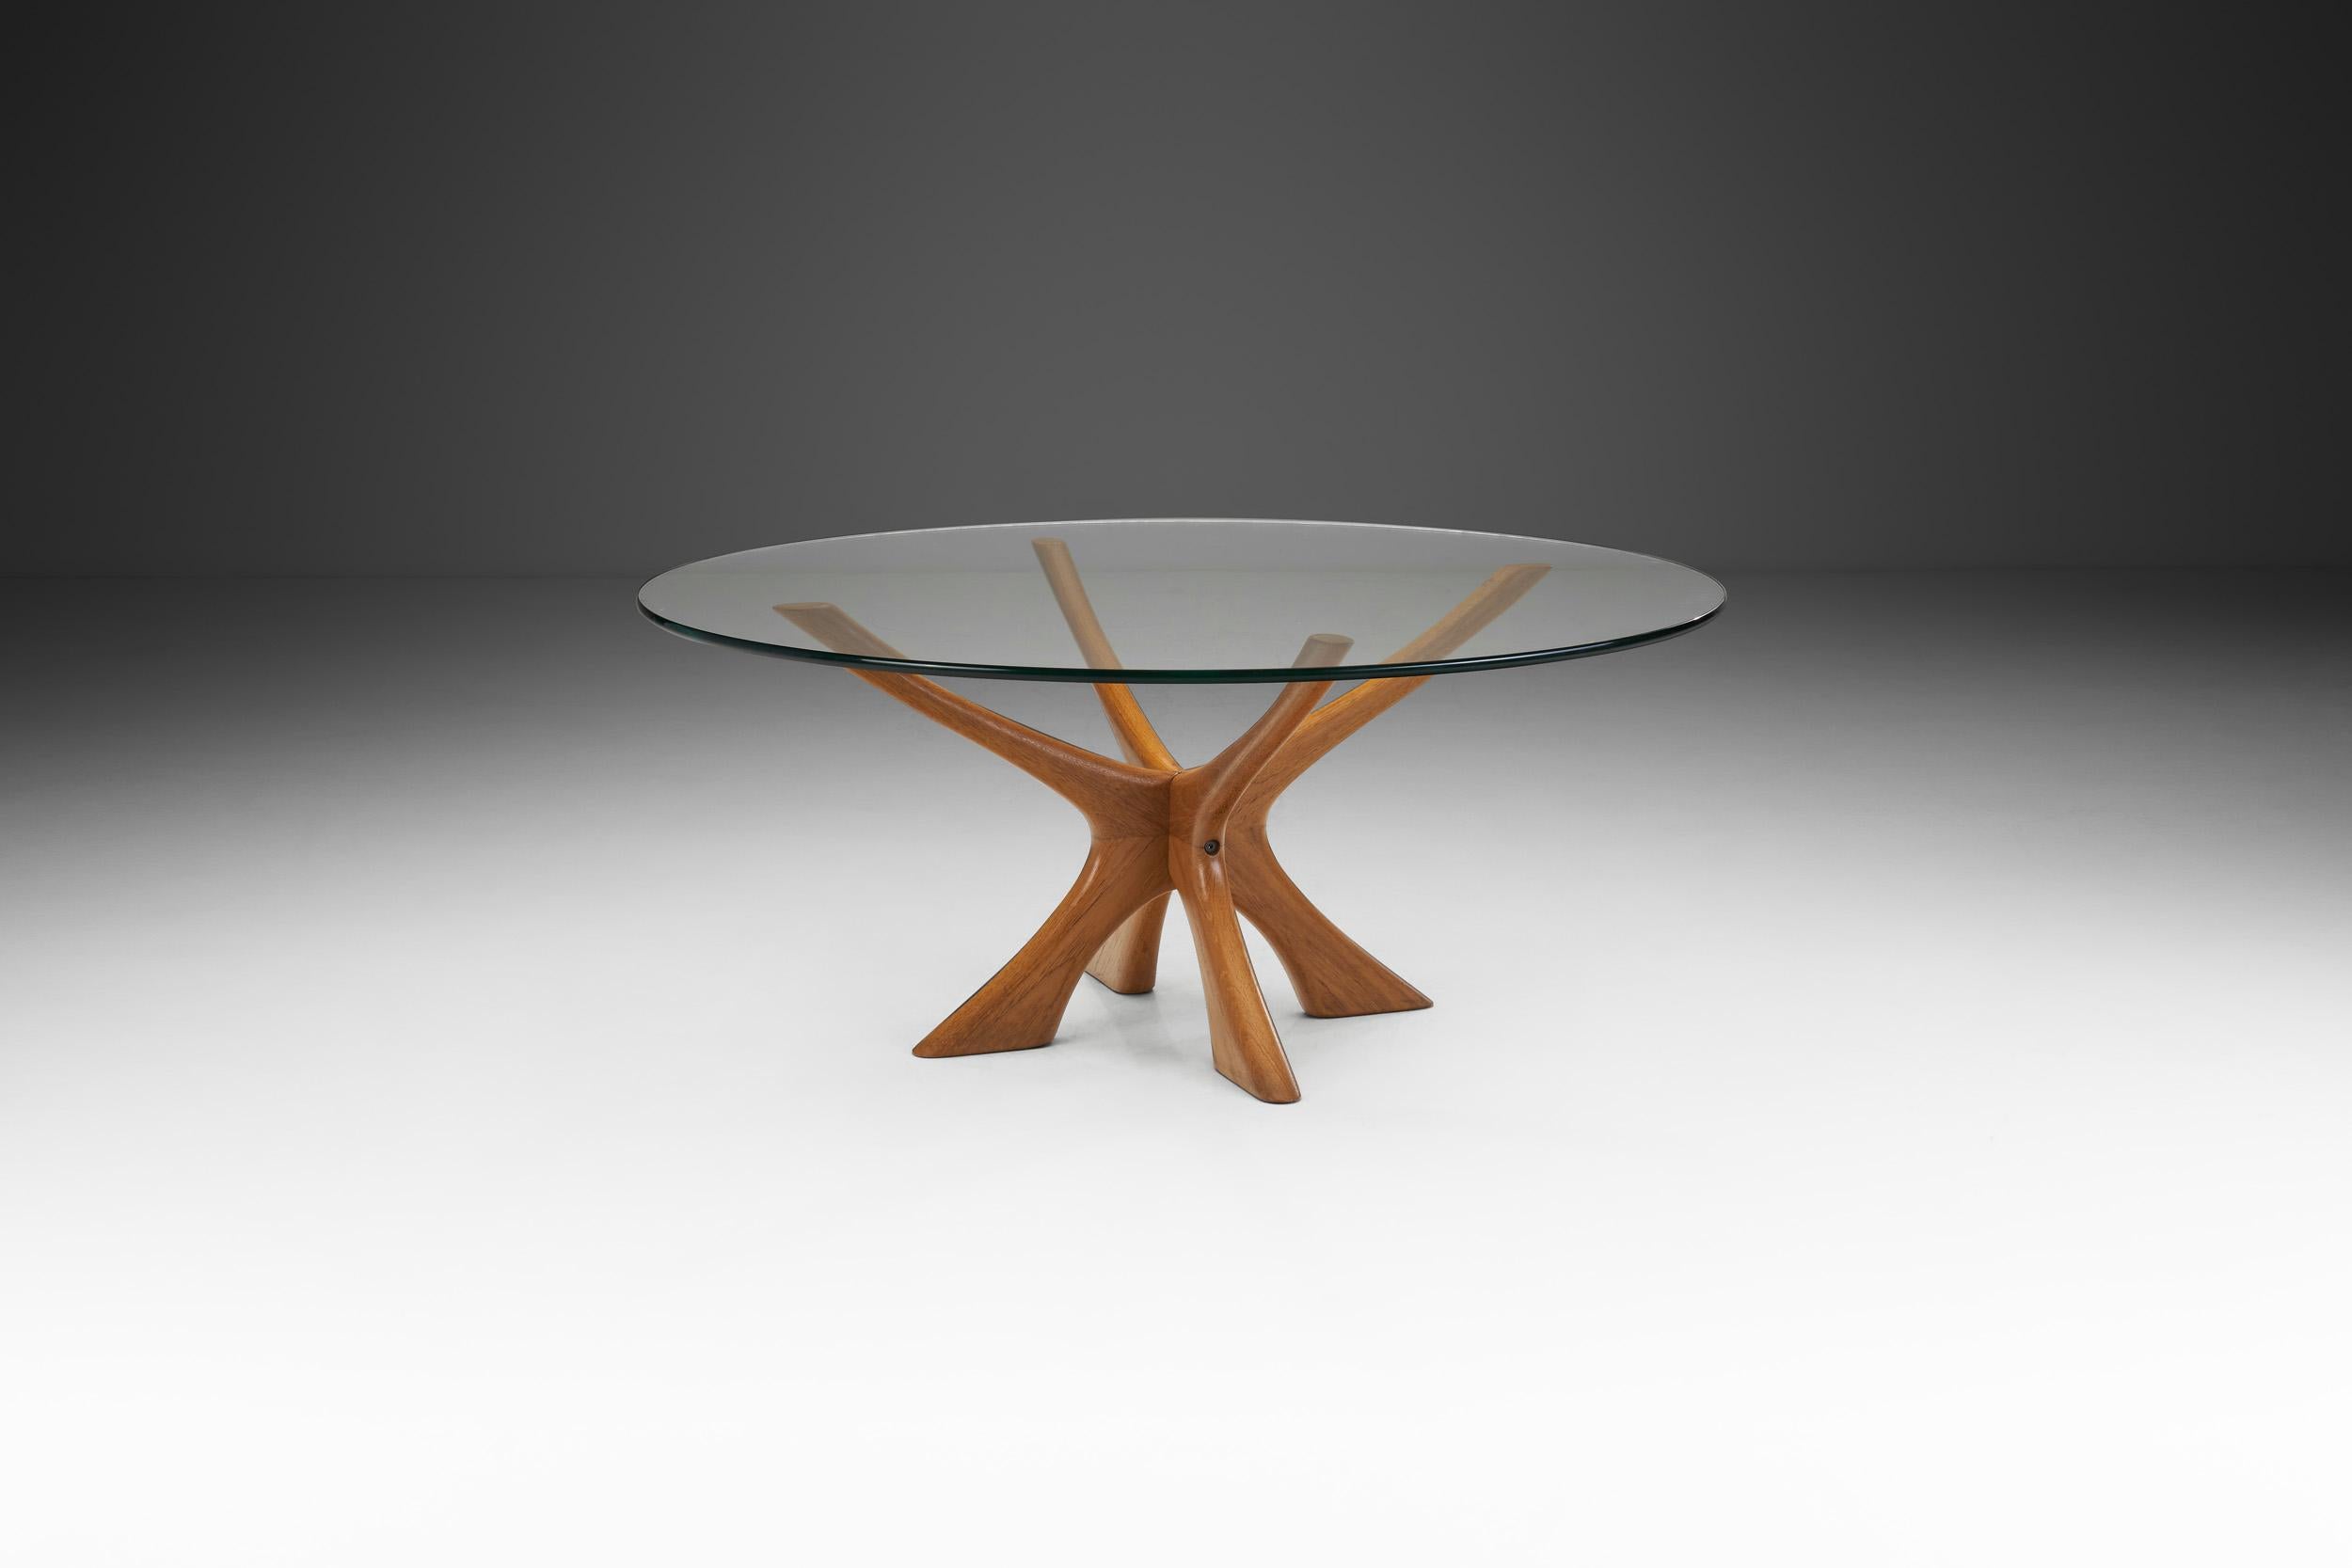 This immediately recognizable model, the “T118” is a Danish modern classic with a glass top and a solid, sculptural wood base. Designed by Illum Wikkelsø, this table always makes a lasting impression in any interior.

The form has an inherently